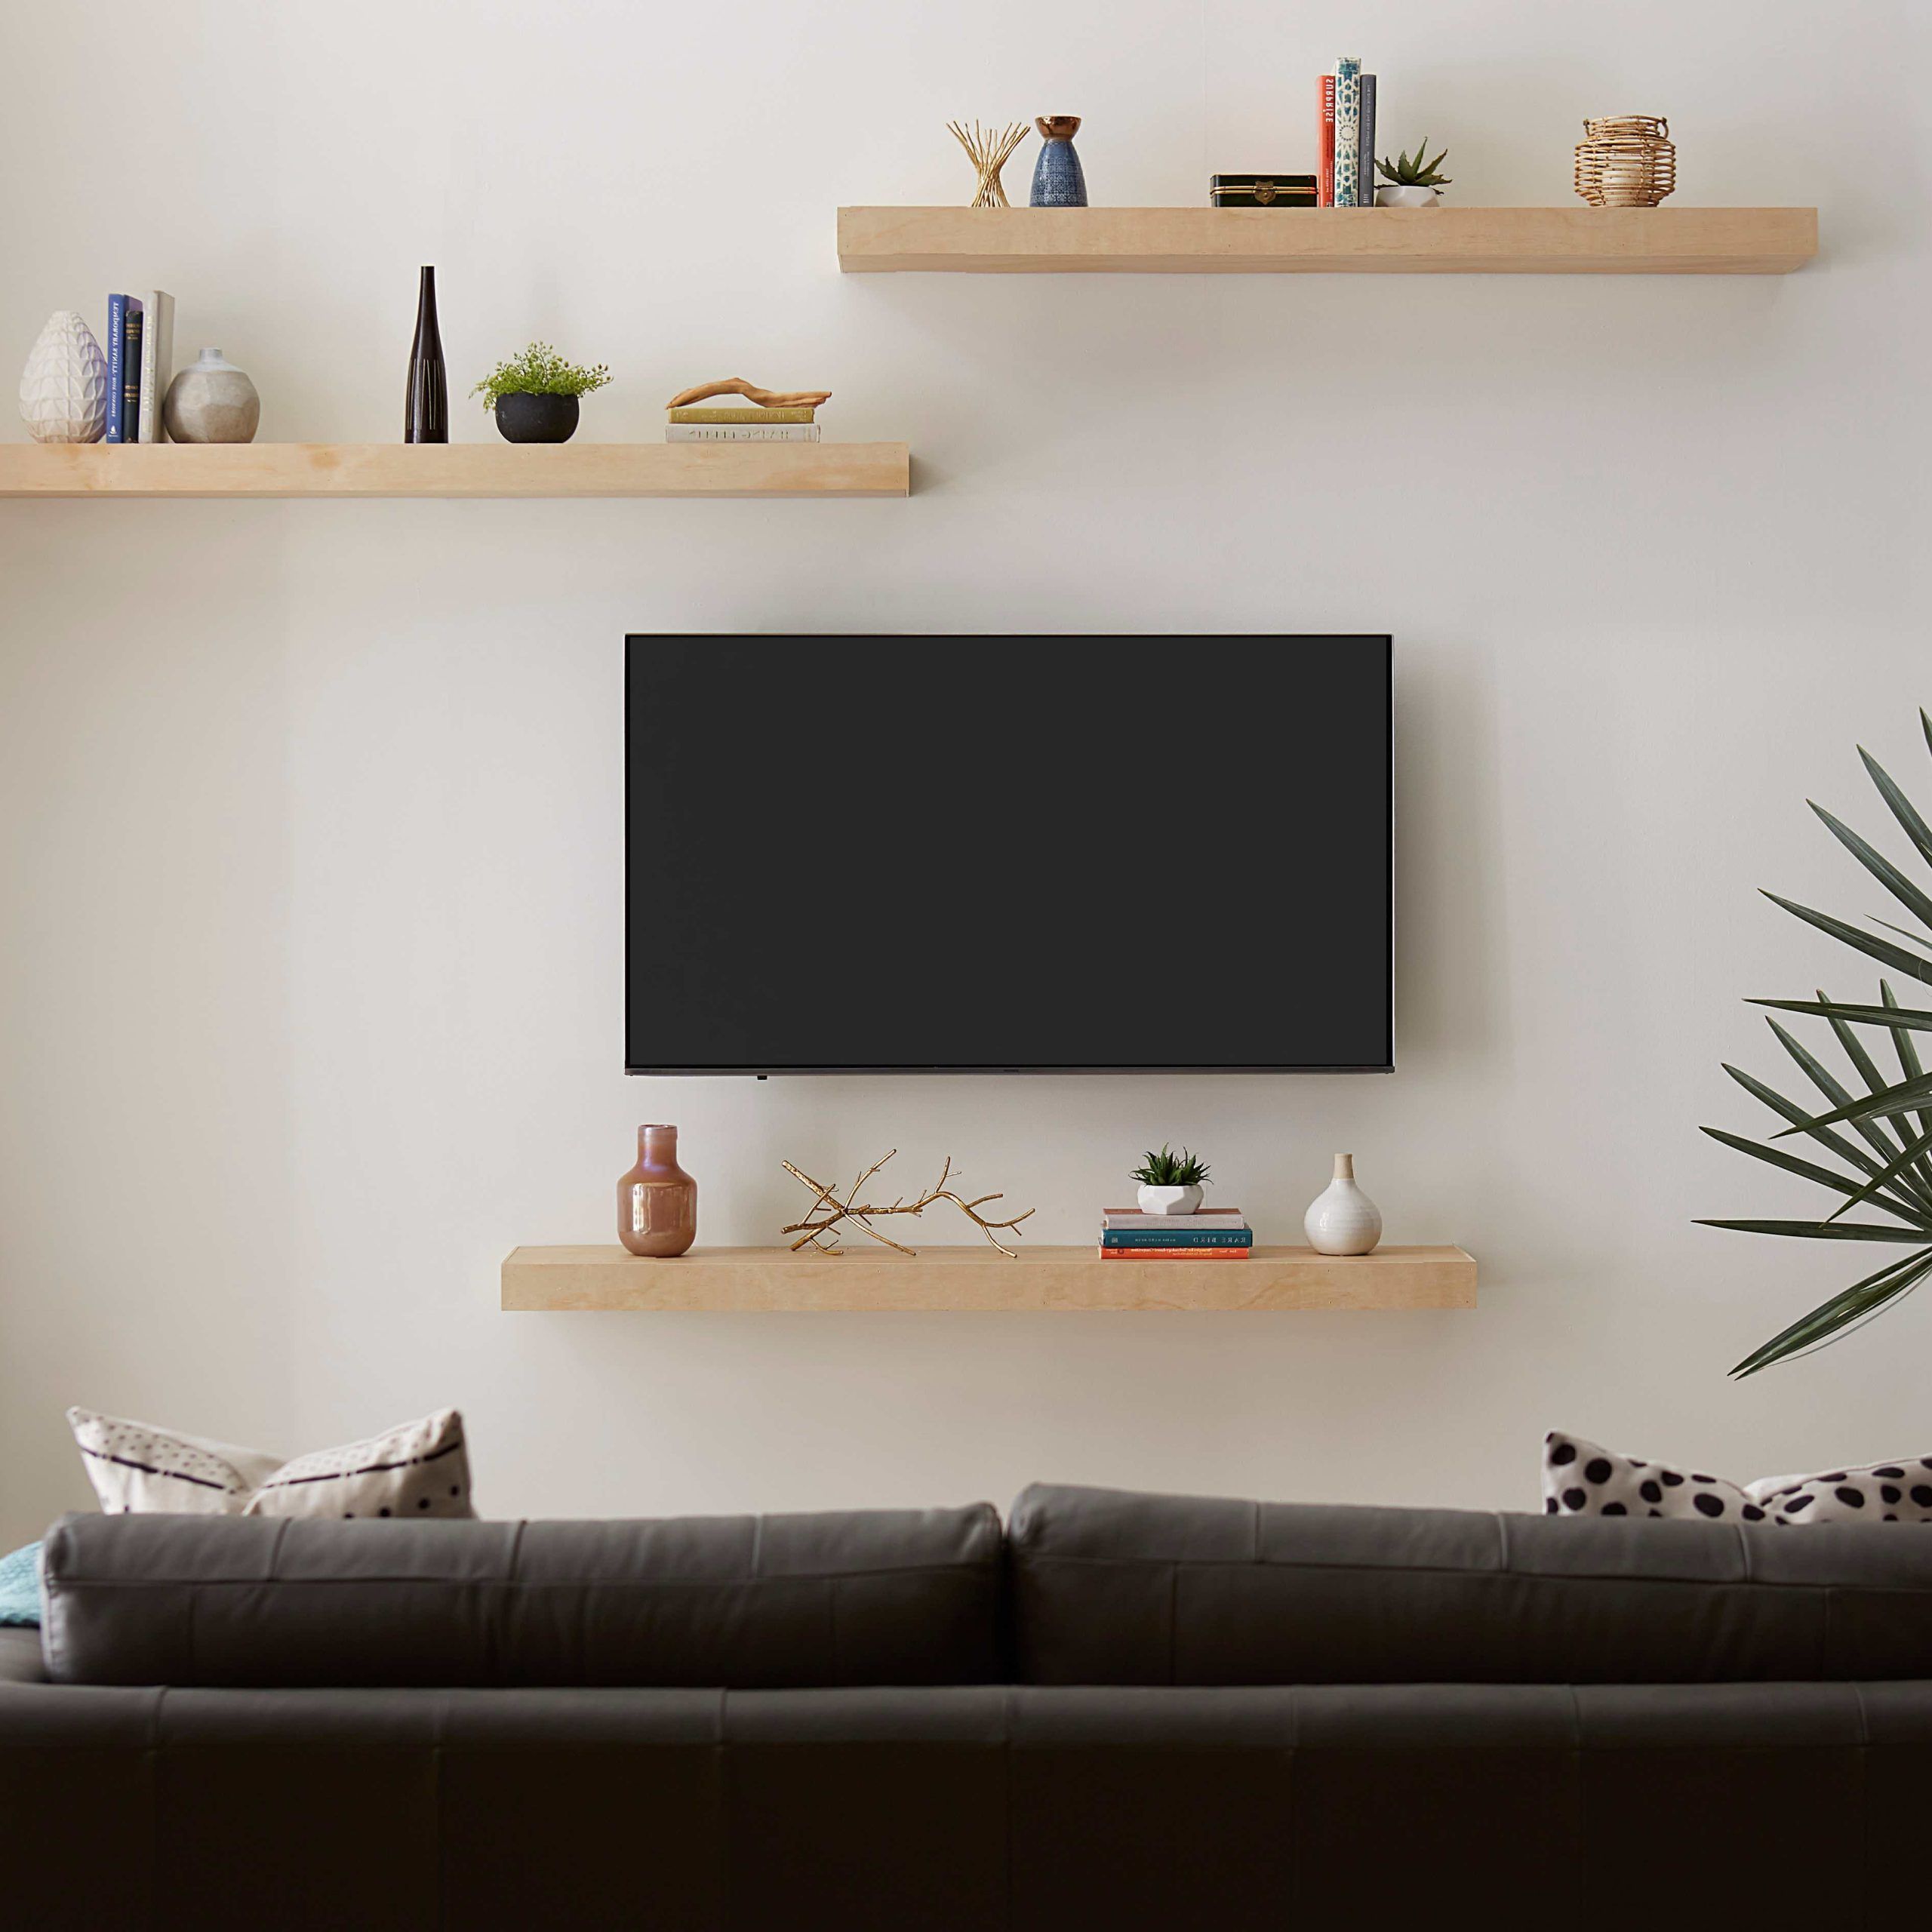 How To Decorate Around Your Tv With Floating Shelves Inside Floating Stands For Tvs (Gallery 13 of 20)